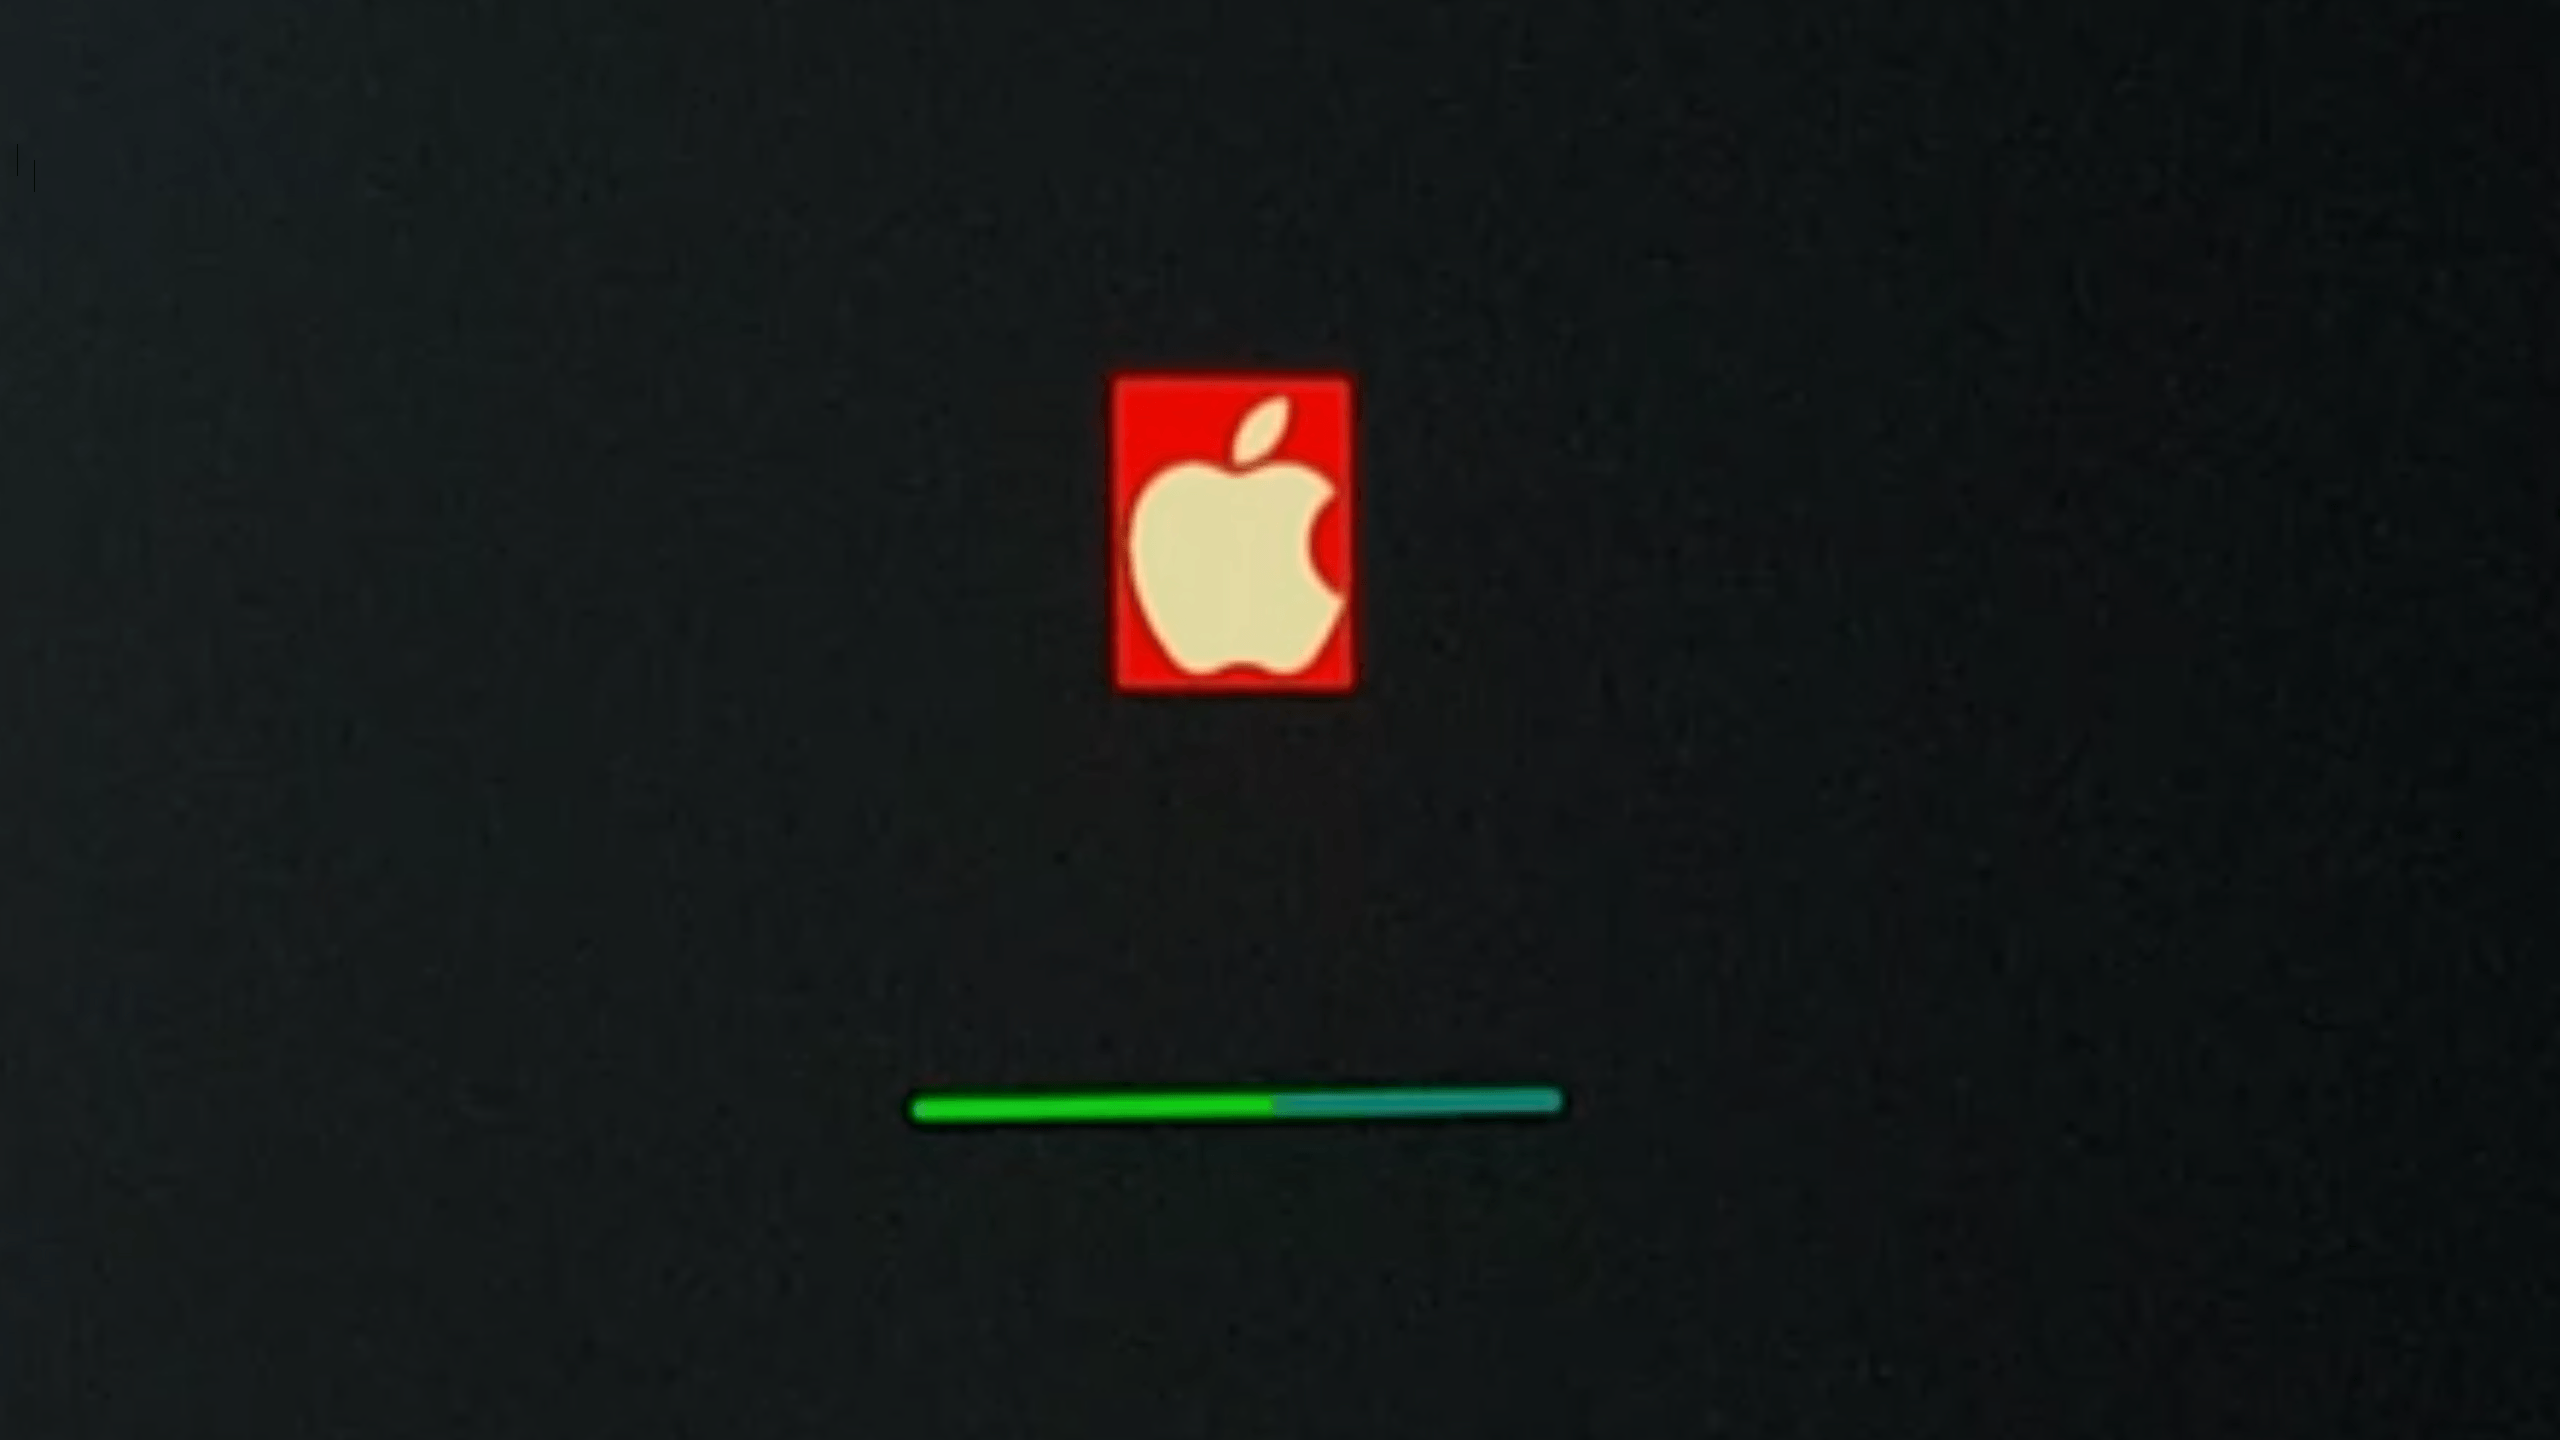 Red and Green Apple Logo - IMac 21.5 8GB 1TB Momentarily Stuck At S